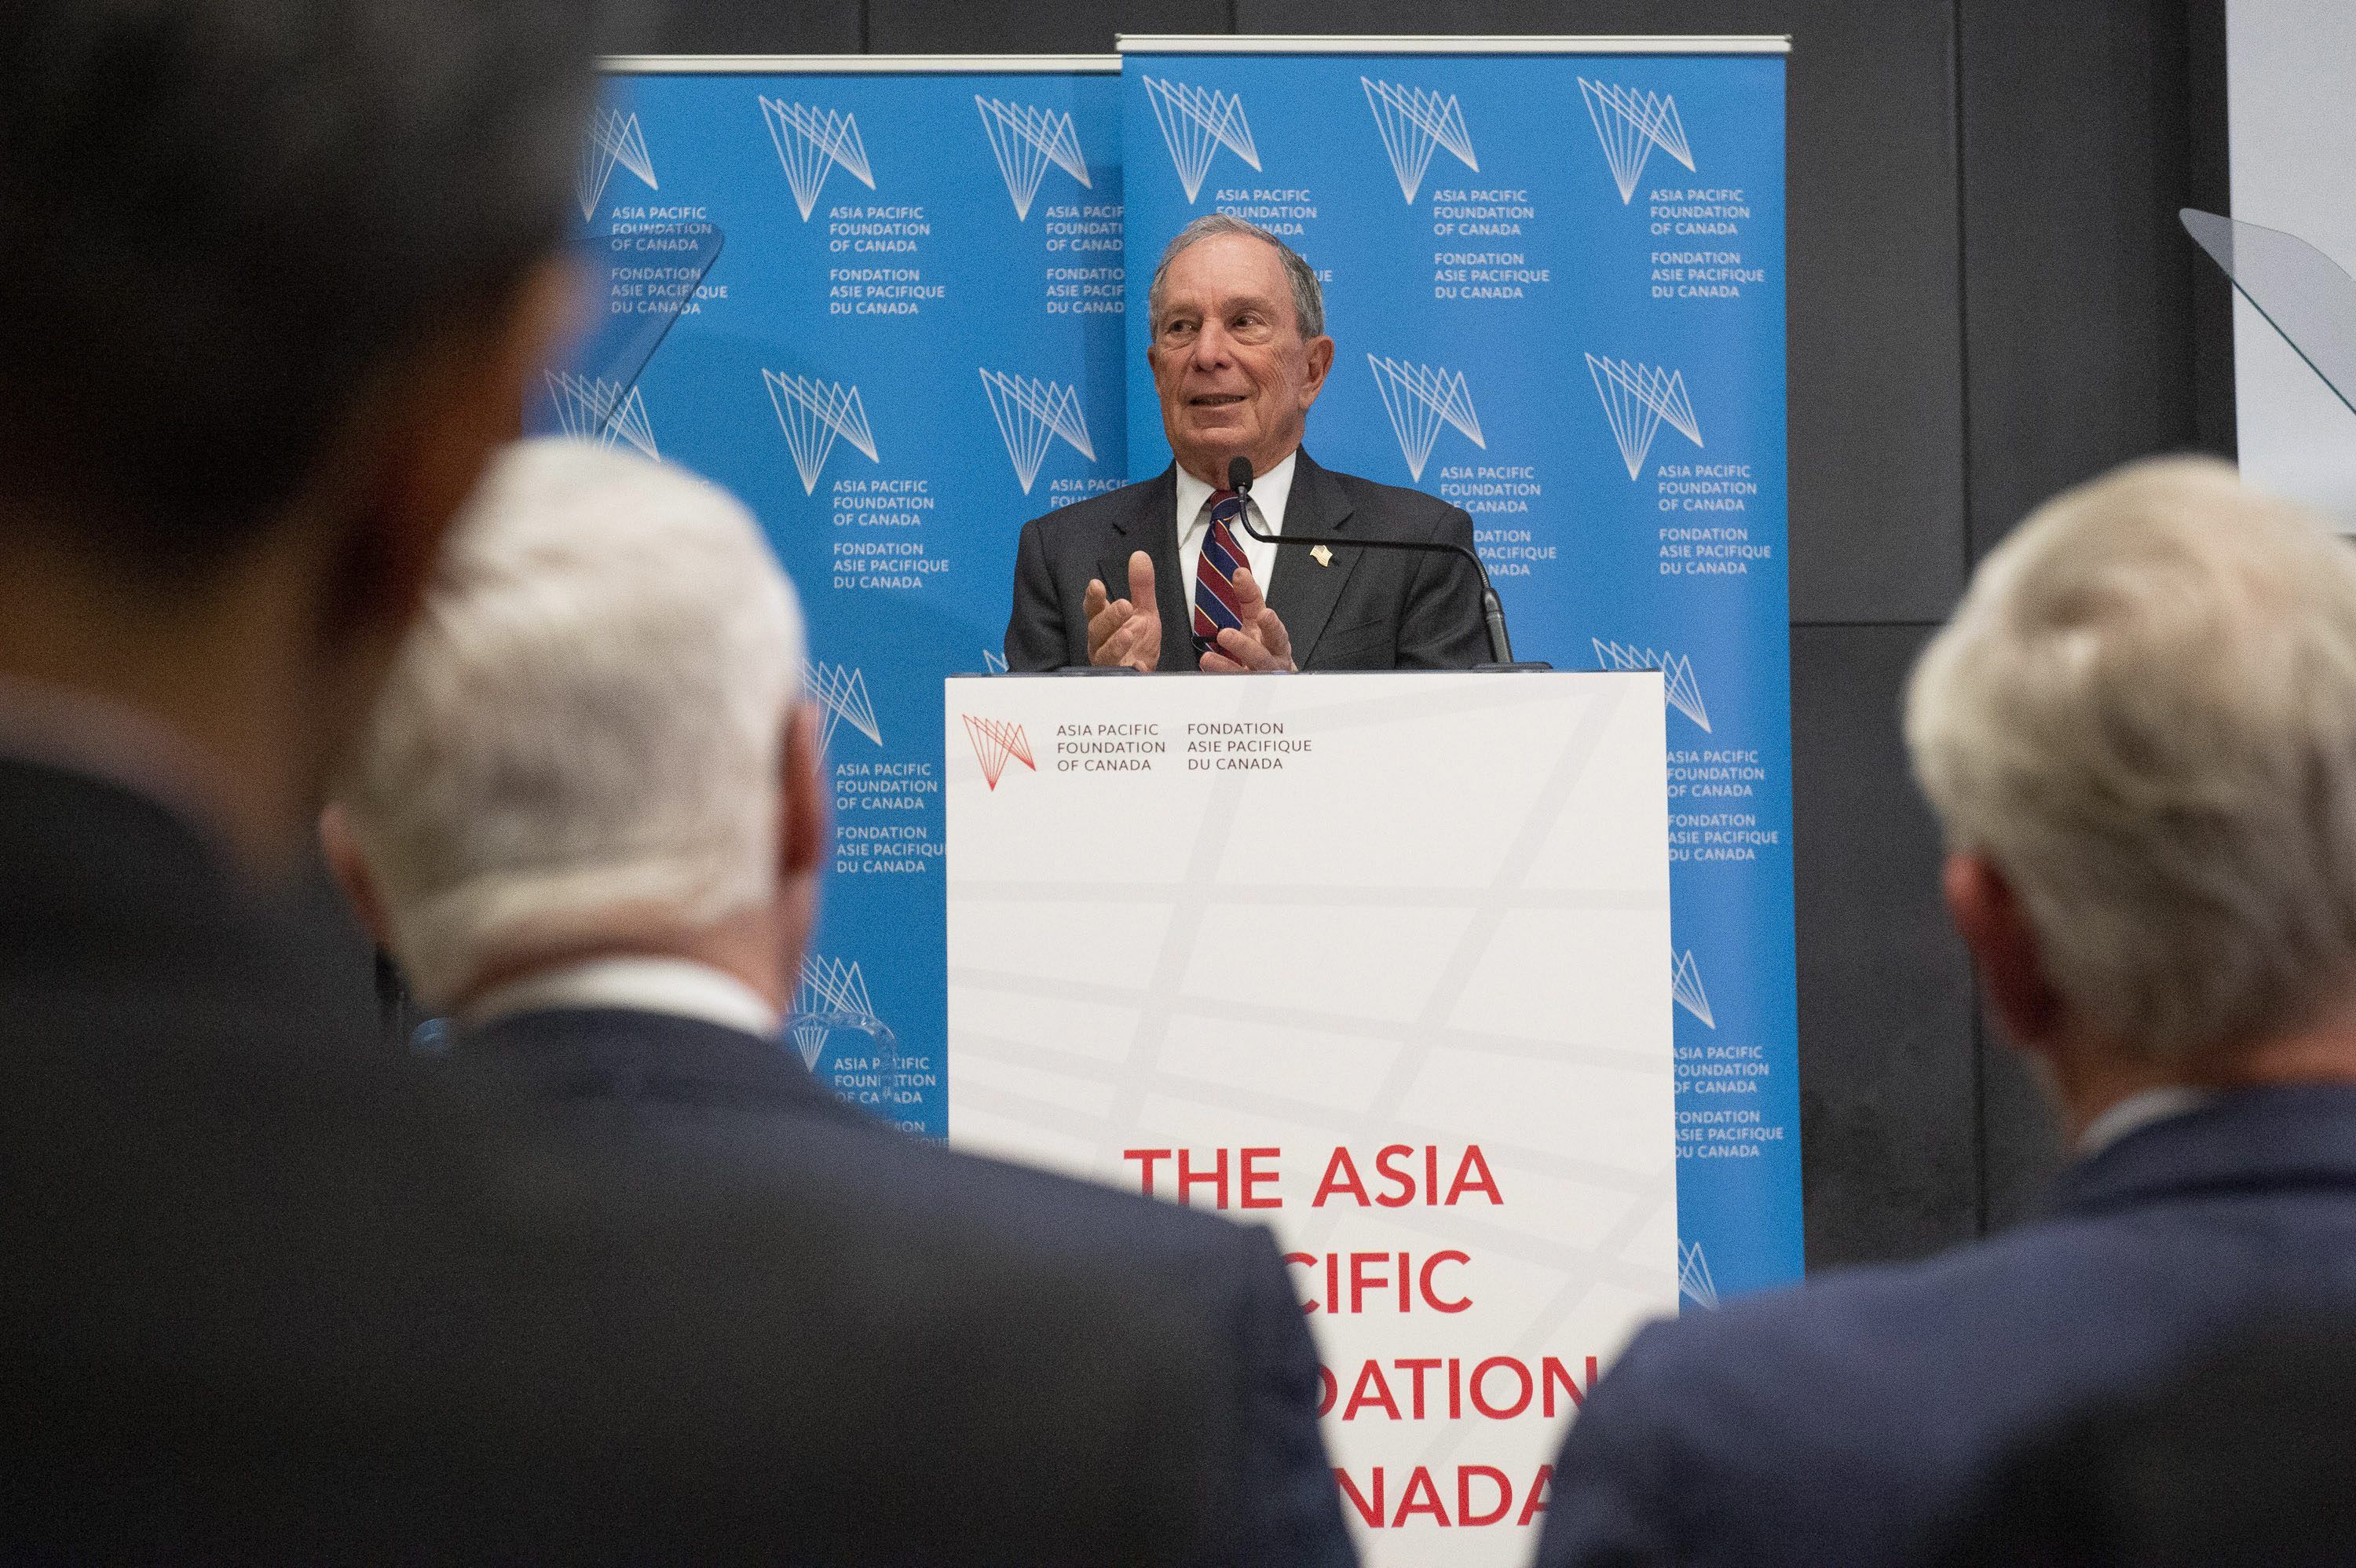 Michael R. Bloomberg addresses a sold-out crowd in Toronto as the Asia Pacific Foundation of Canada&#8217;s 2nd John H. McArthur Distinguished Fellow